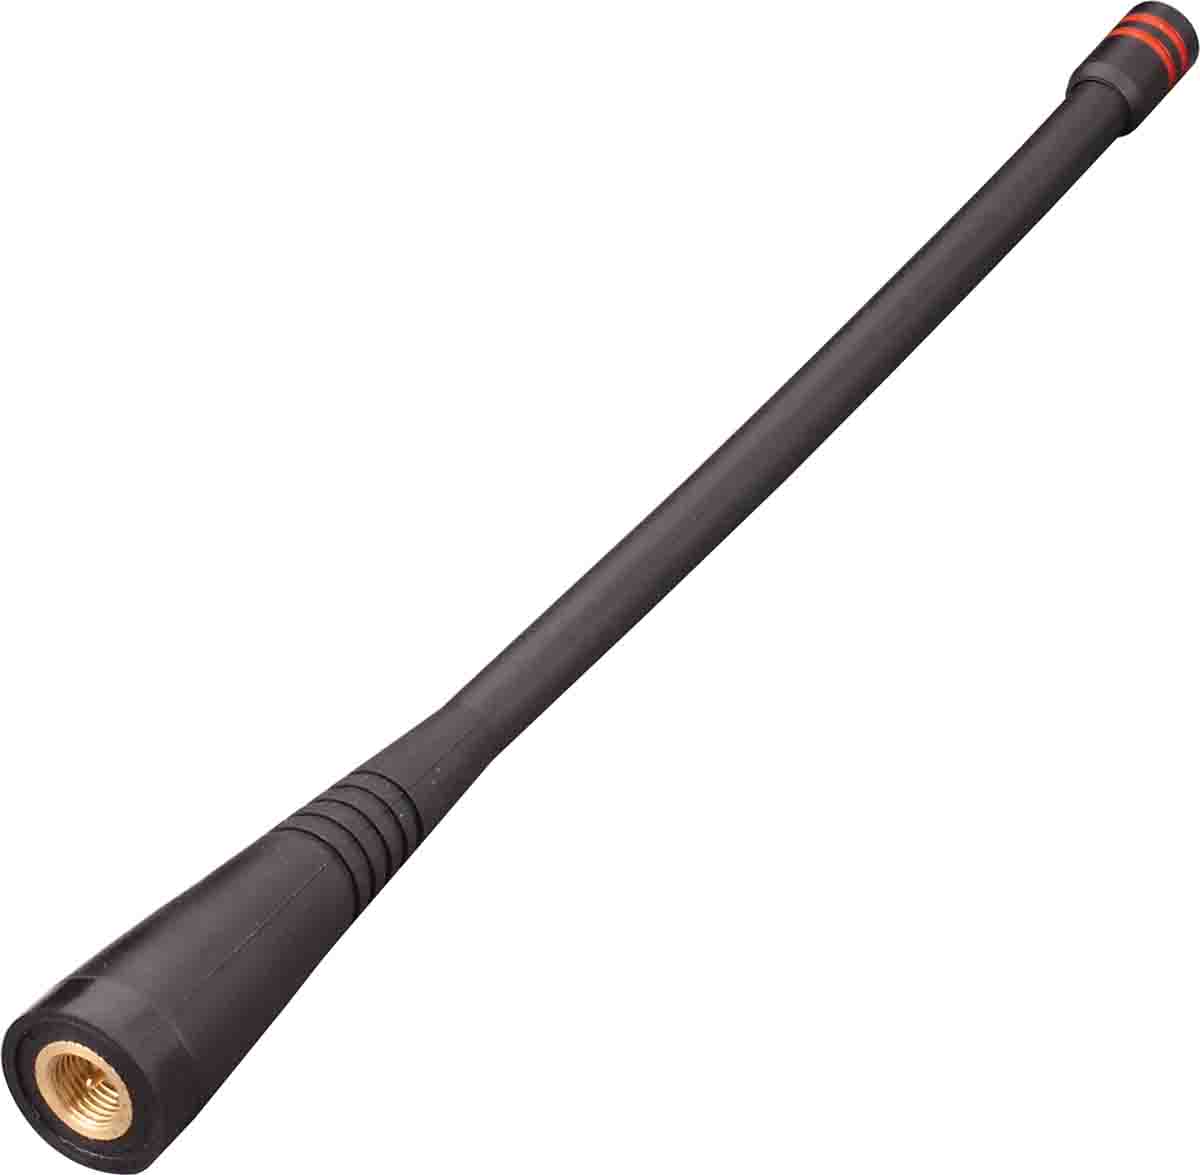 Linx ANT-433-CW-QW-SMA Whip Omnidirectional Telemetry Antenna with SMA Connector, ISM Band